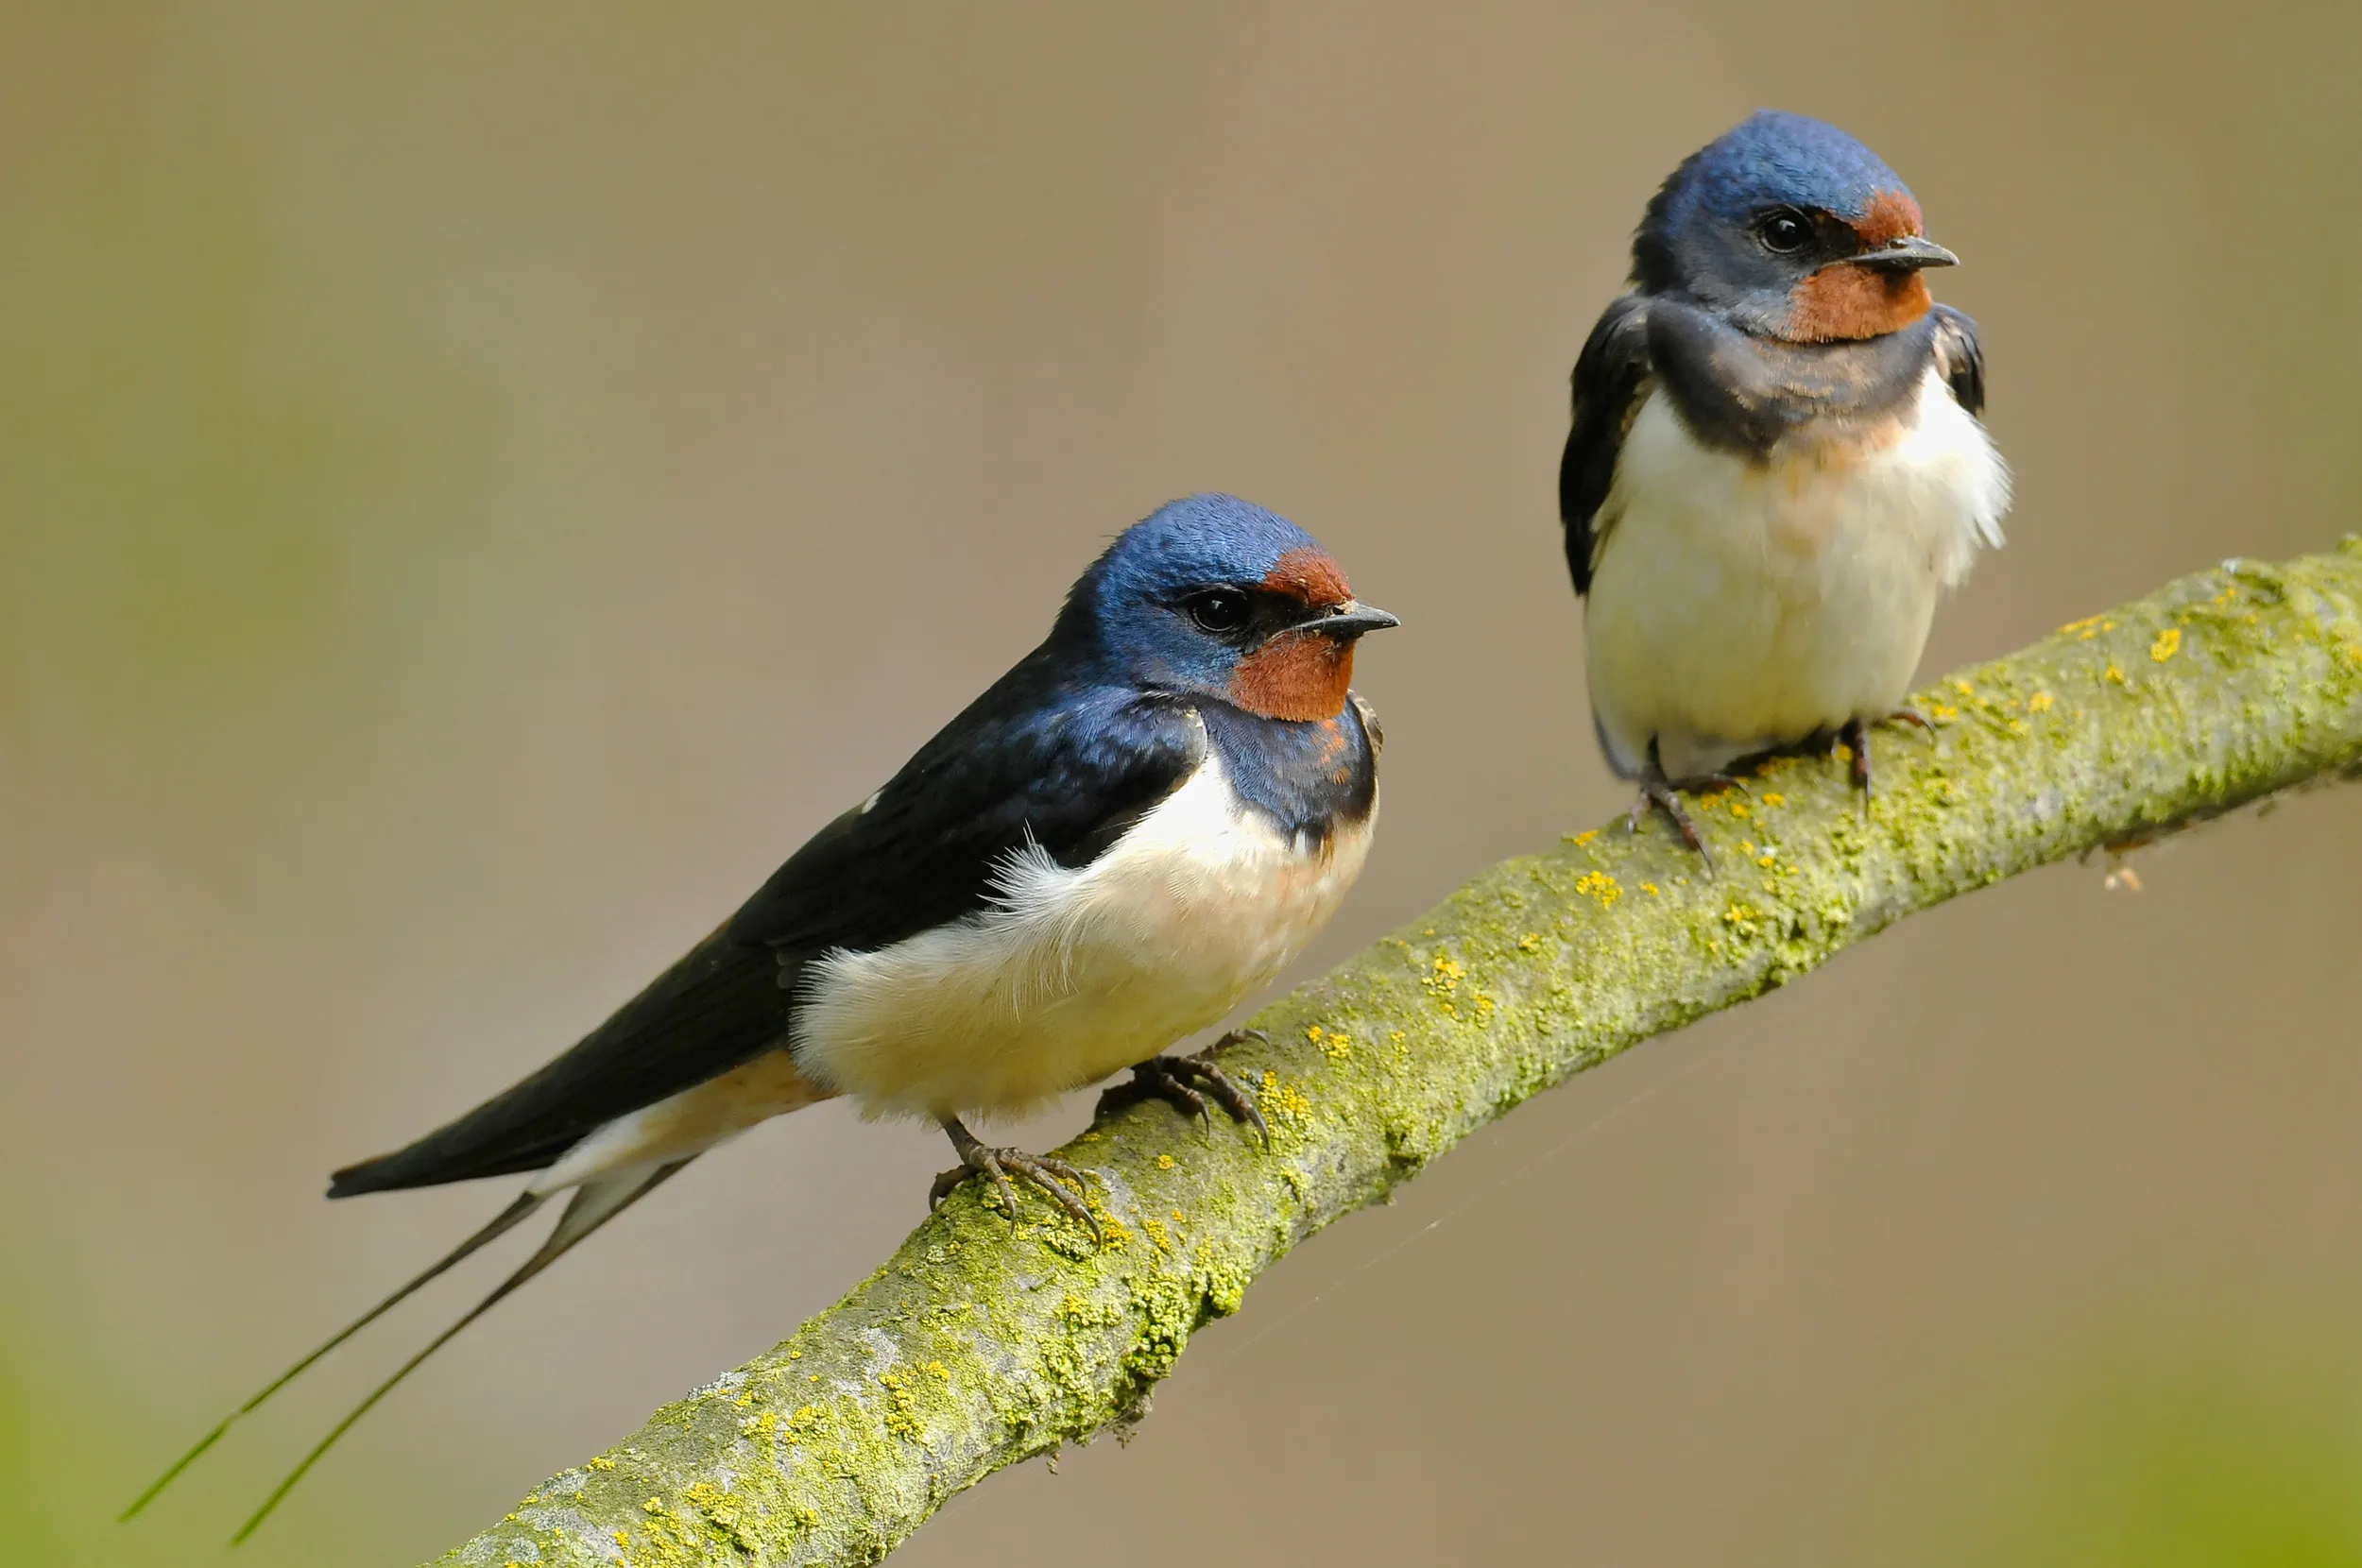 A pair of Swallows perched on a lichen covered branch.